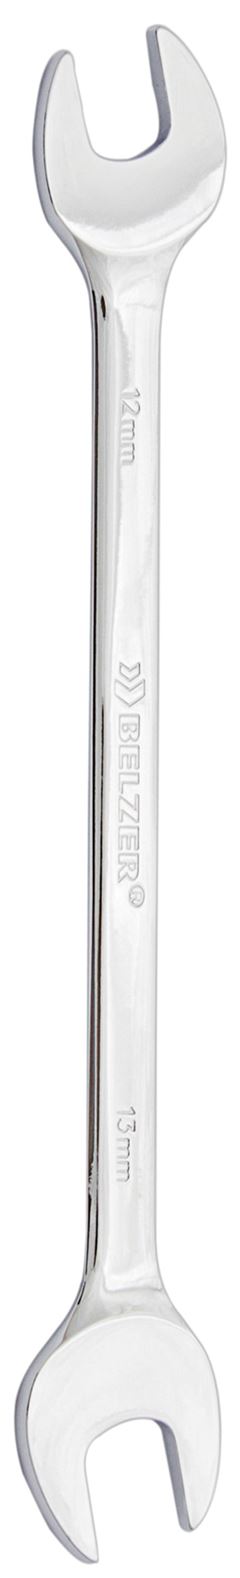 CHAVE FIXA 20X22MM BELZER